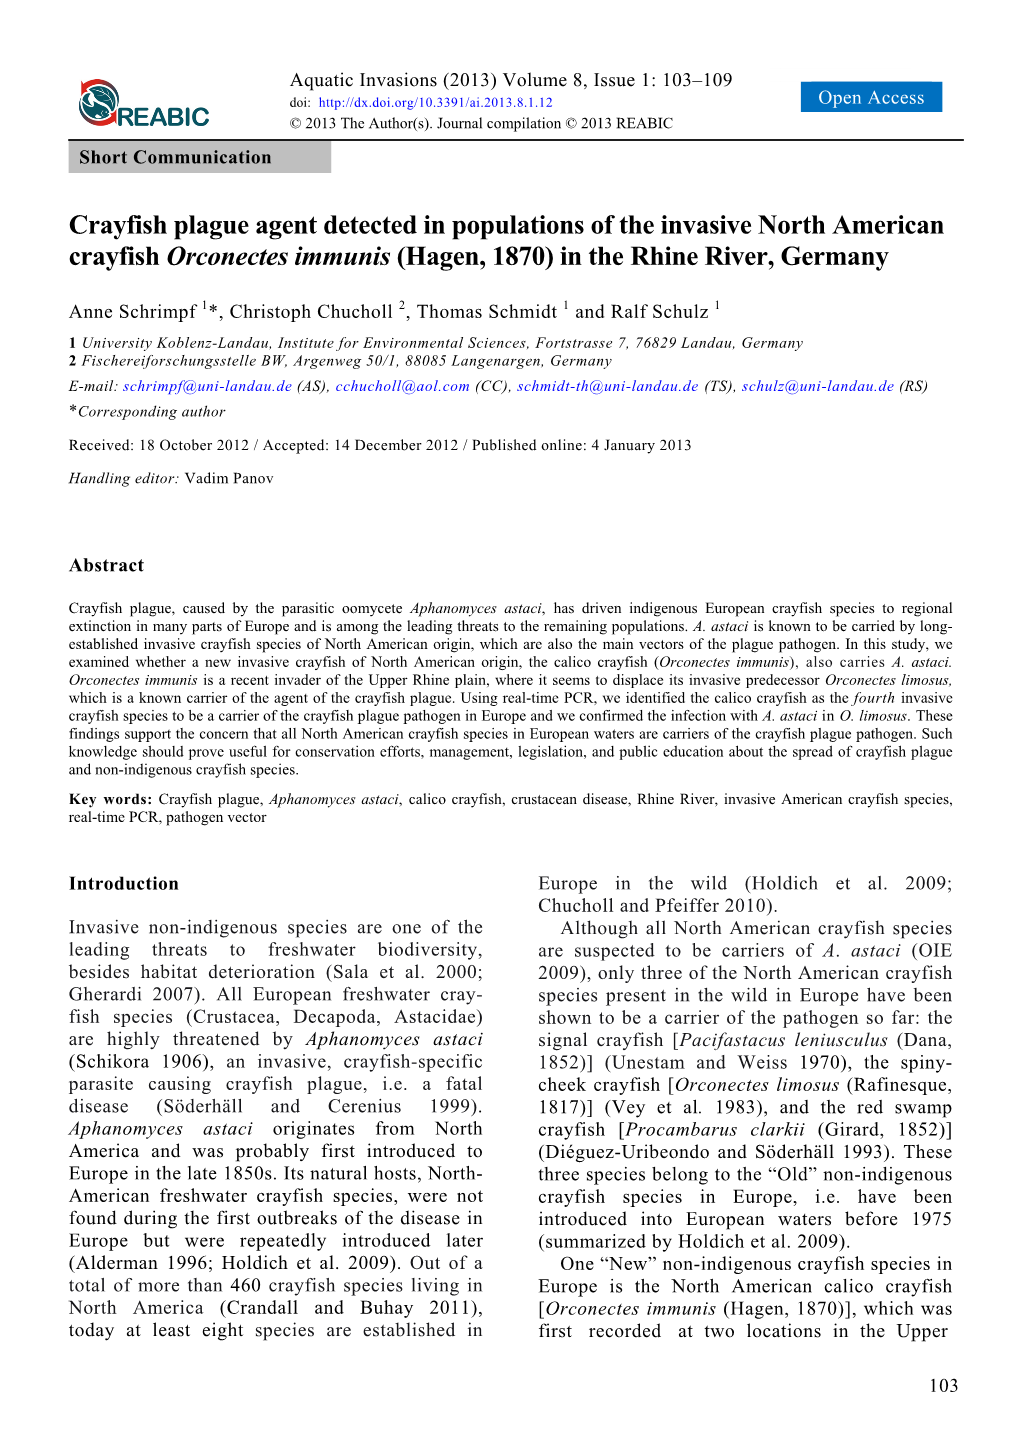 Crayfish Plague Agent Detected in Populations of the Invasive North American Crayfish Orconectes Immunis (Hagen, 1870) in the Rhine River, Germany